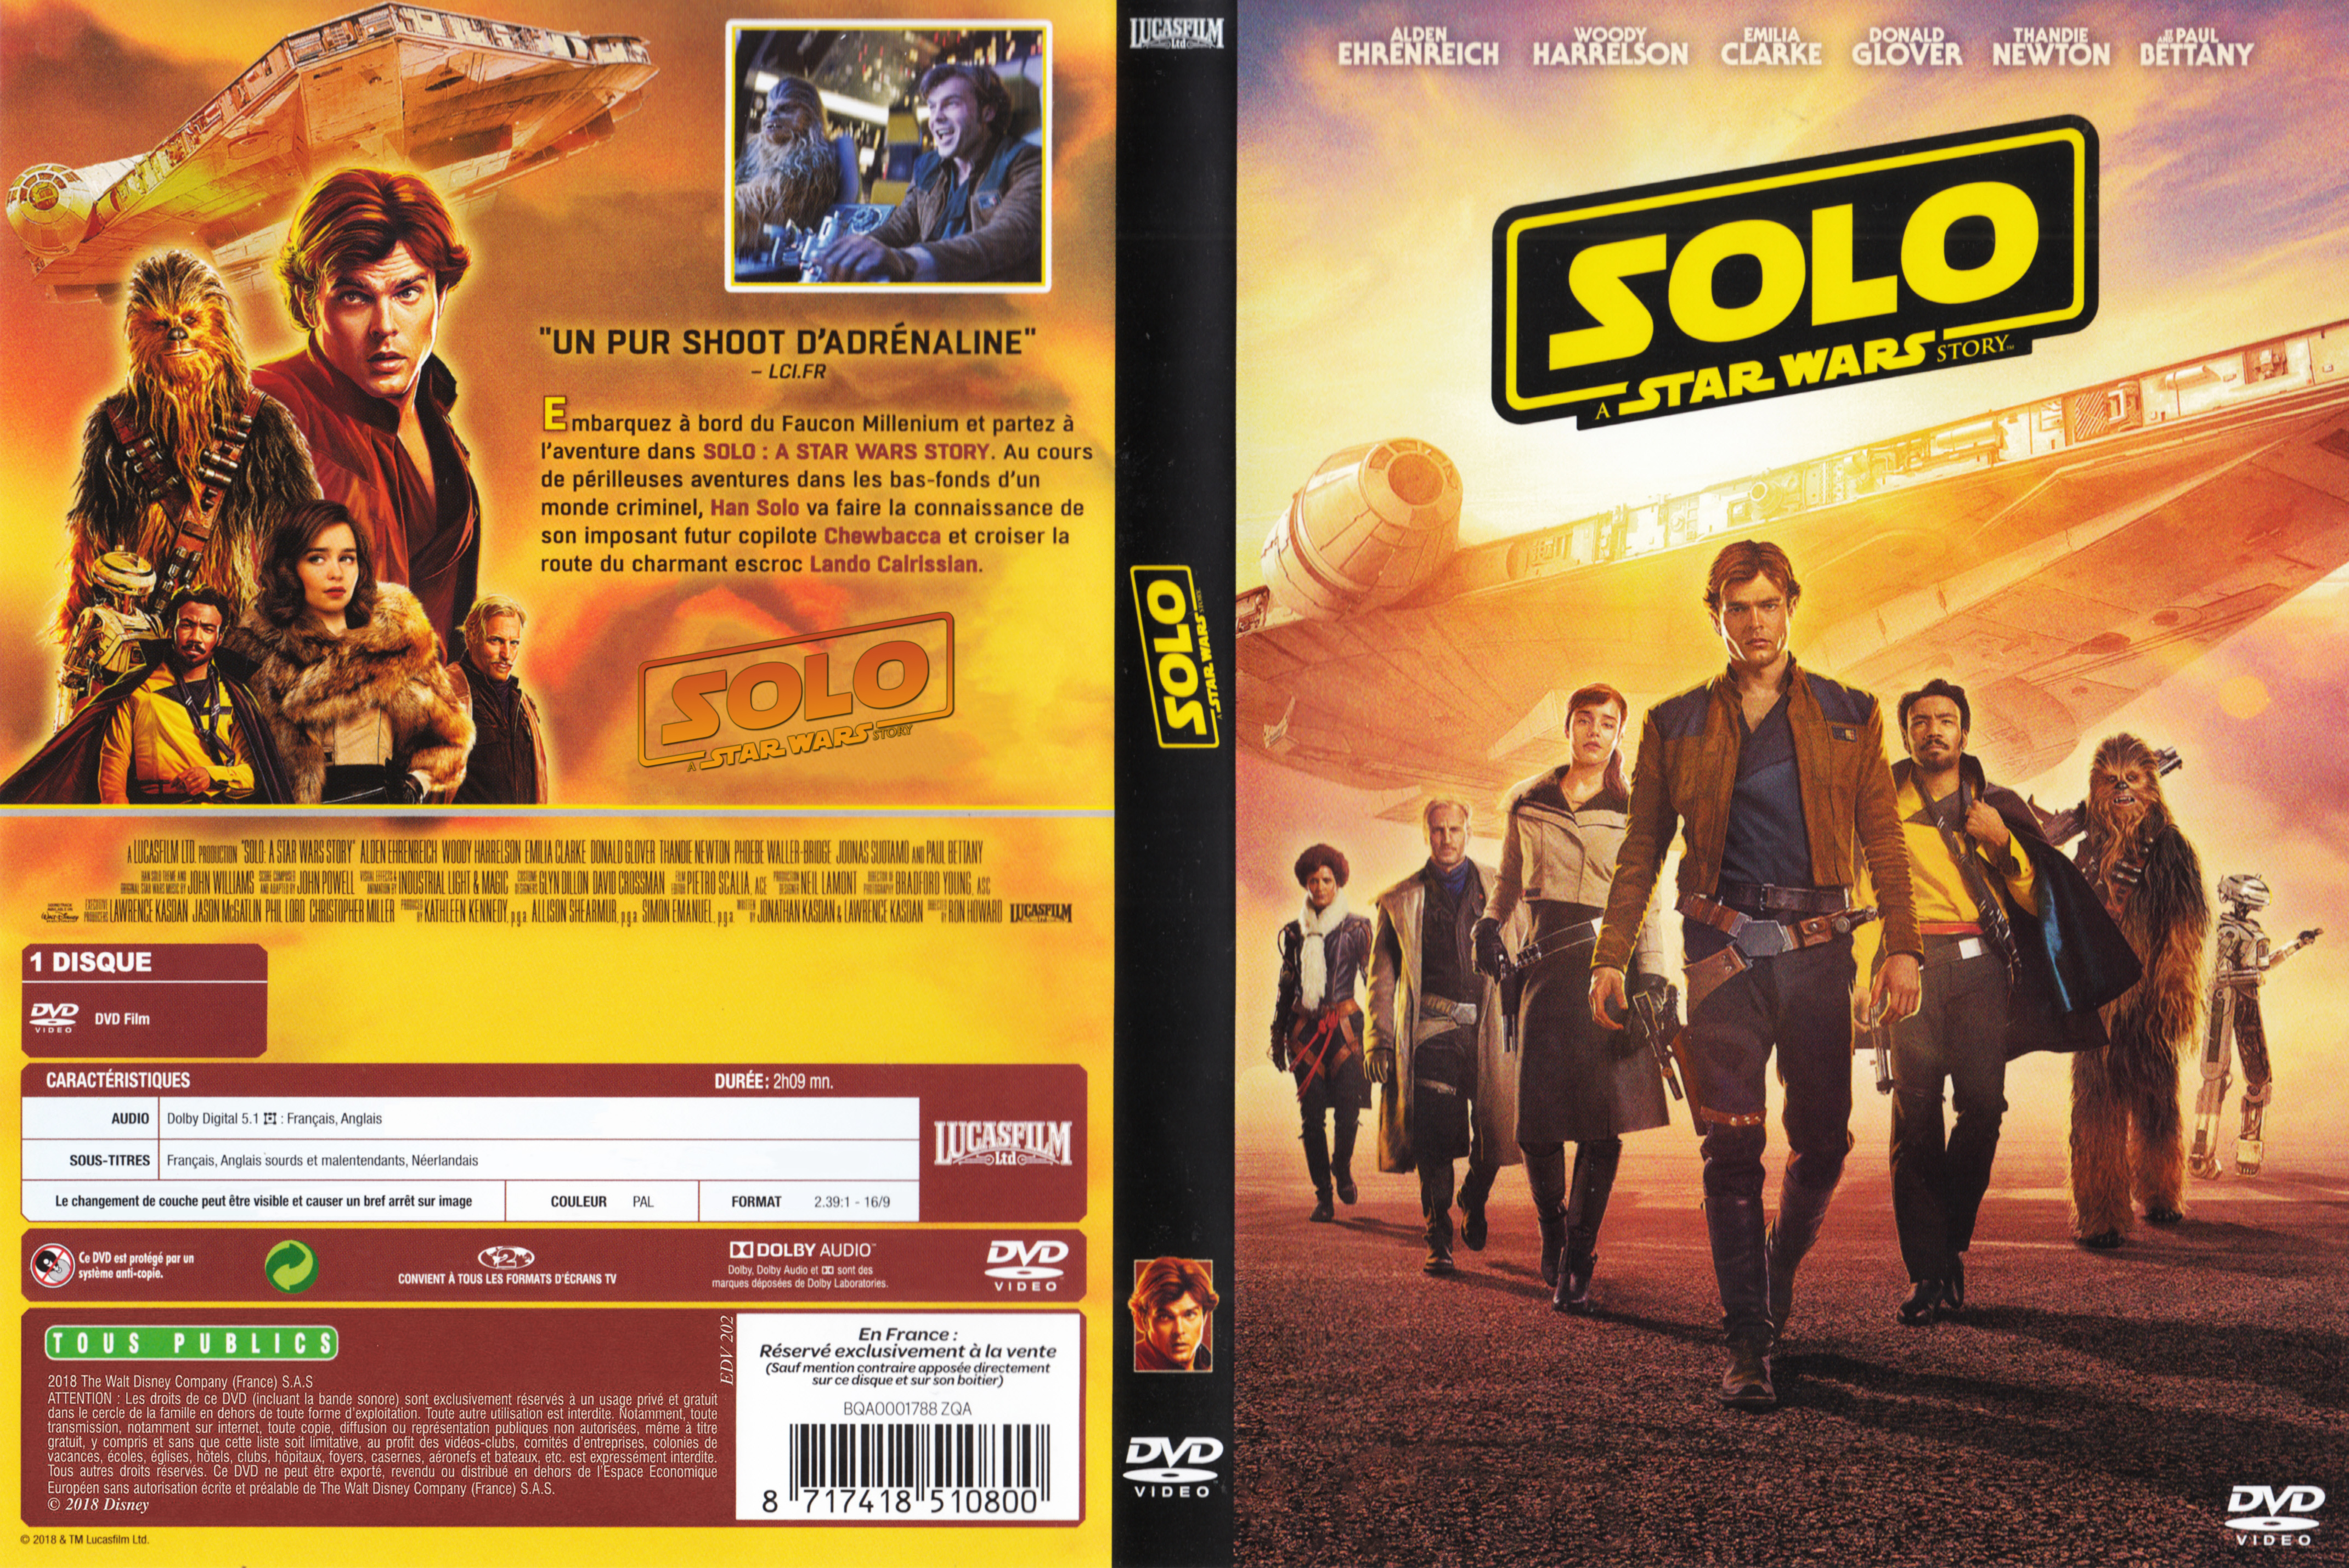 Jaquette DVD Solo: A Star Wars Story custom v2